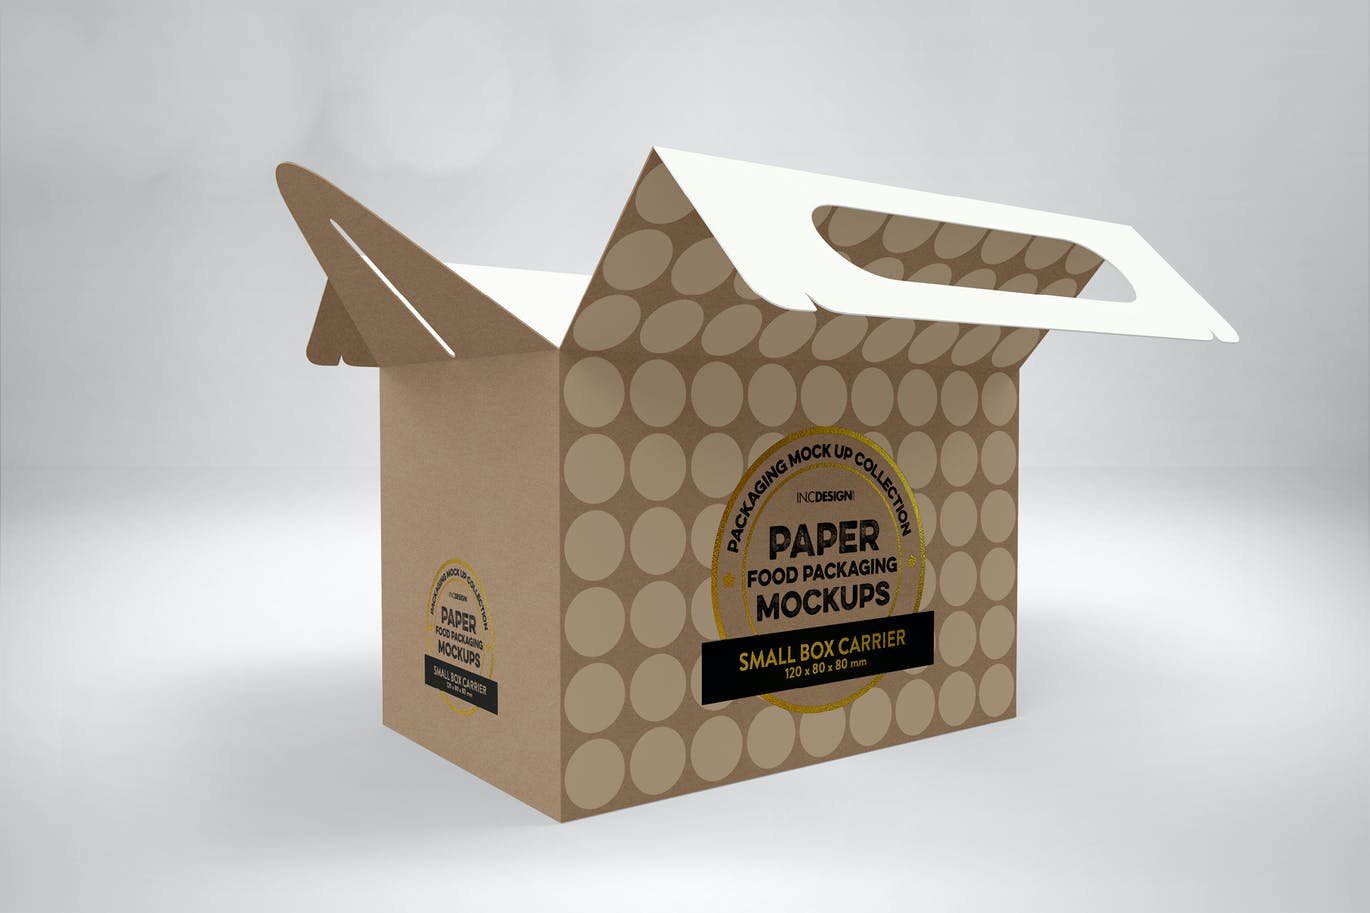 Small Cake Box Carrier Packaging Mockup